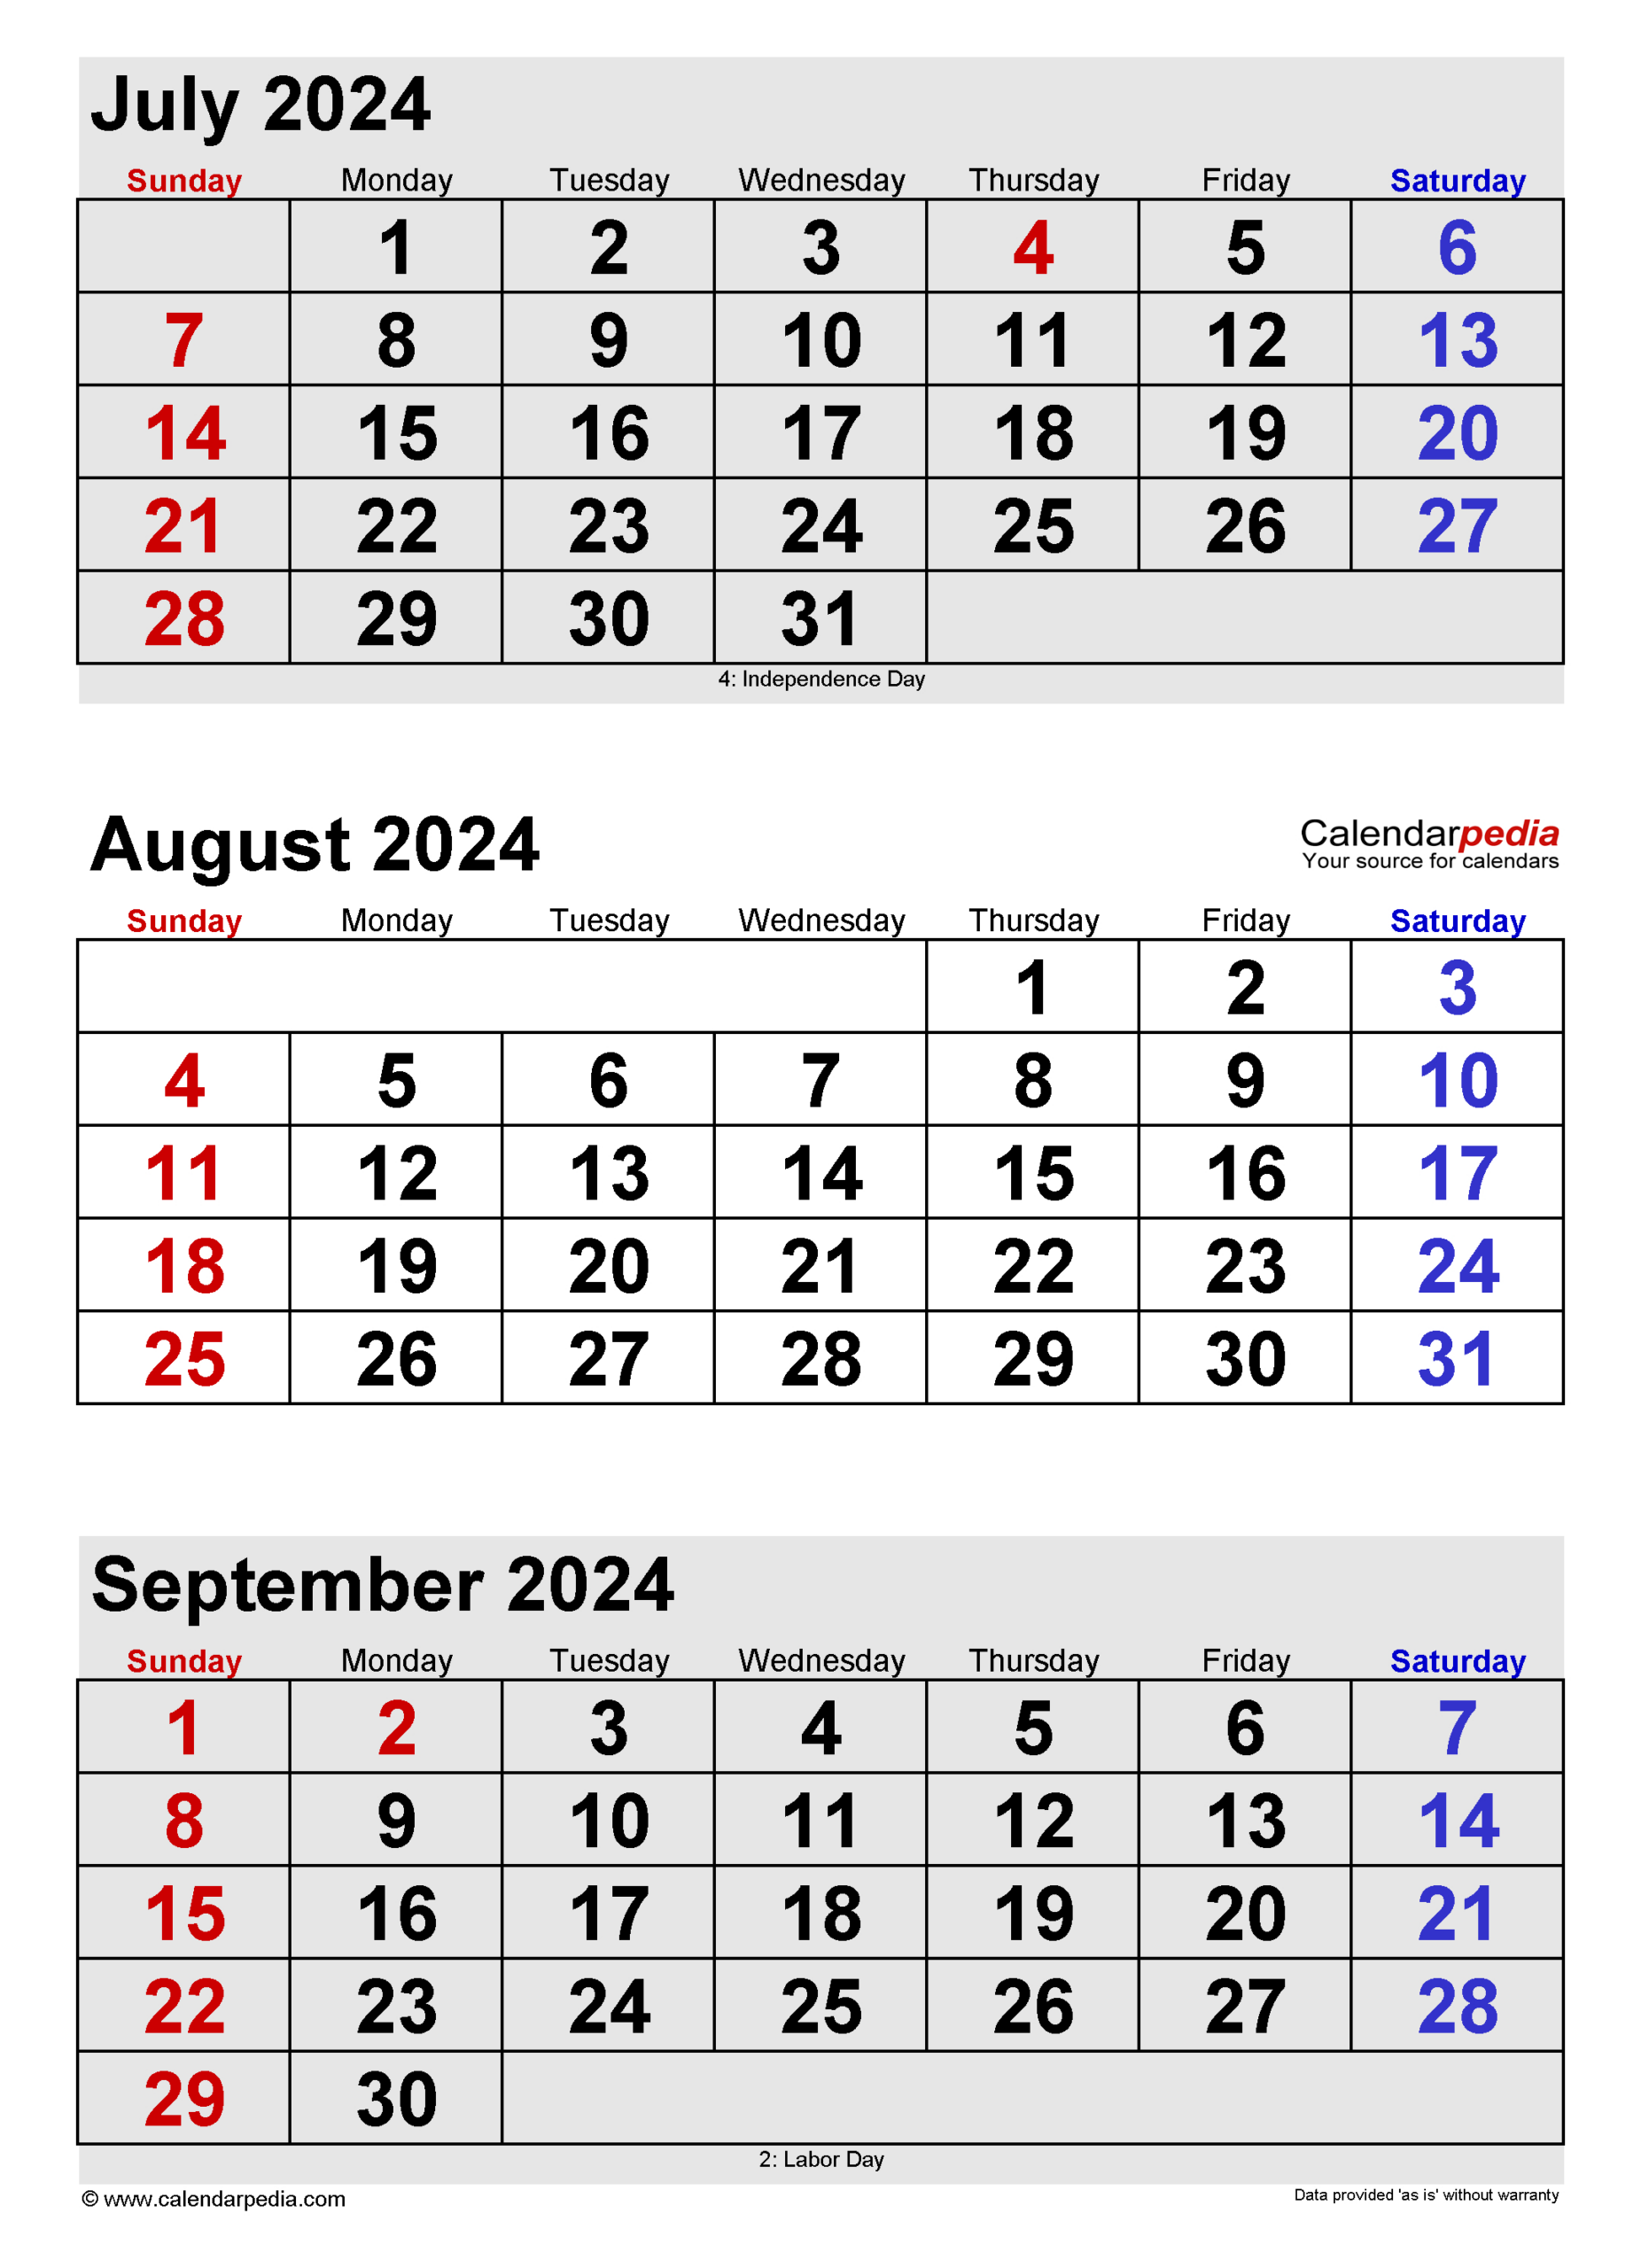 August 2024 Calendar | Templates For Word, Excel And Pdf intended for July Aug Sept 2024 Calendar